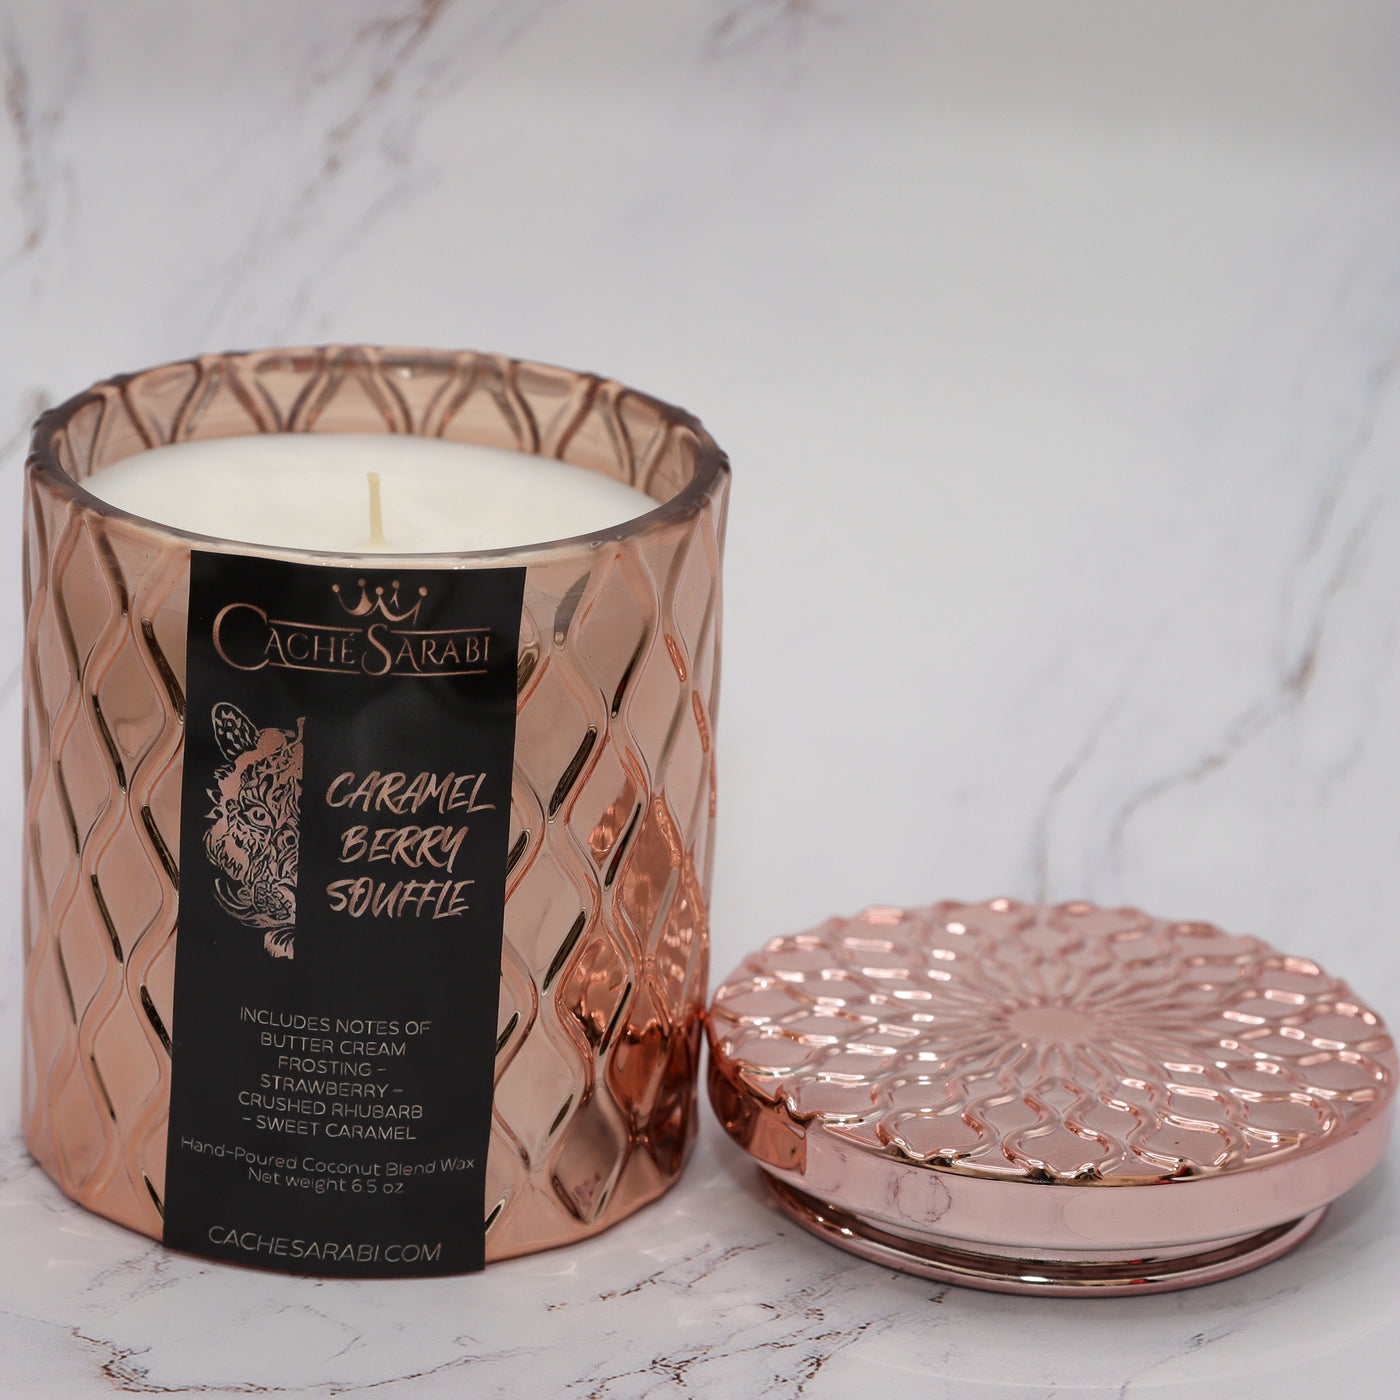 Indulge in the Caramel Berry Souffle dressed in an elegant rose gold vessel, with its delicious scent notes of butter cream frosting, strawberry, and sweet caramel. 